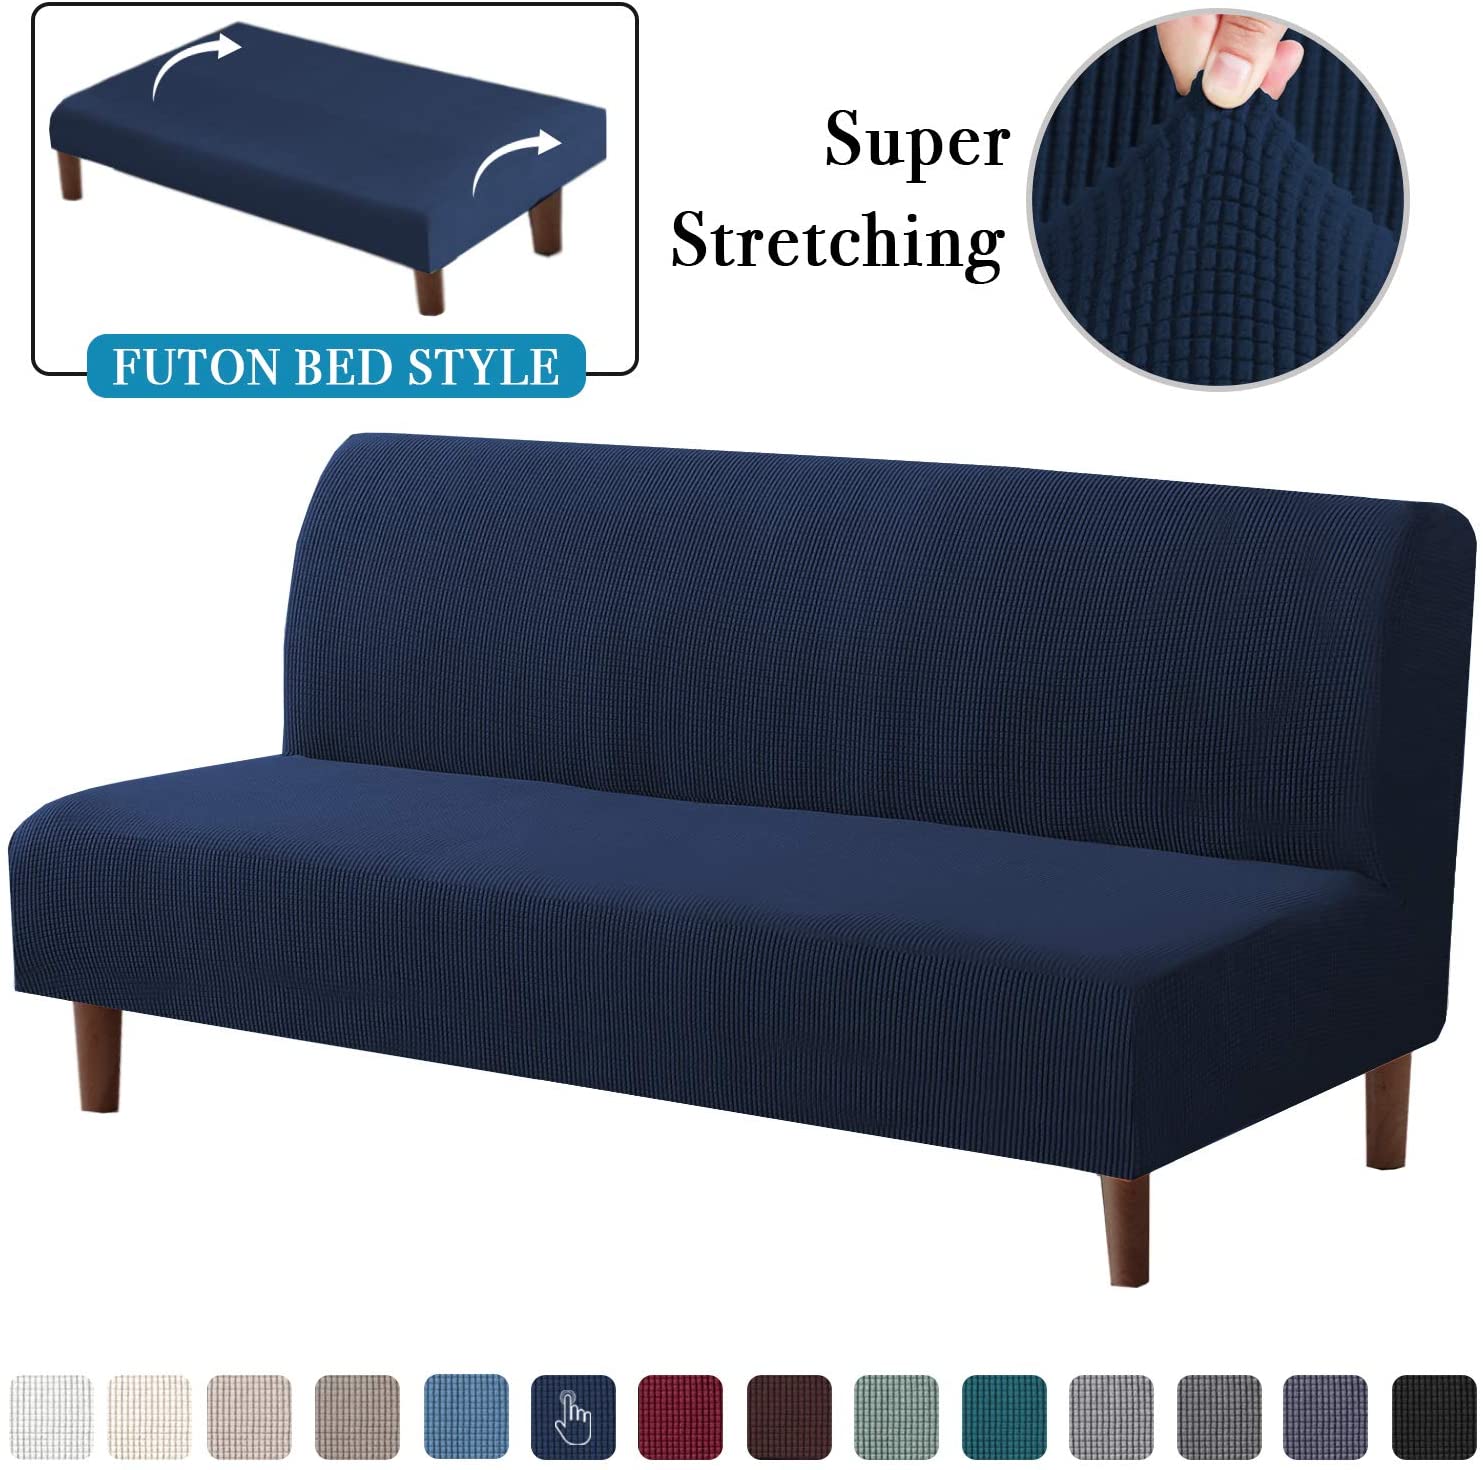 Details about   Stretch Armless Futon Cover Futon Slipcover Full Queen Size Futon Couch Cover Fu 